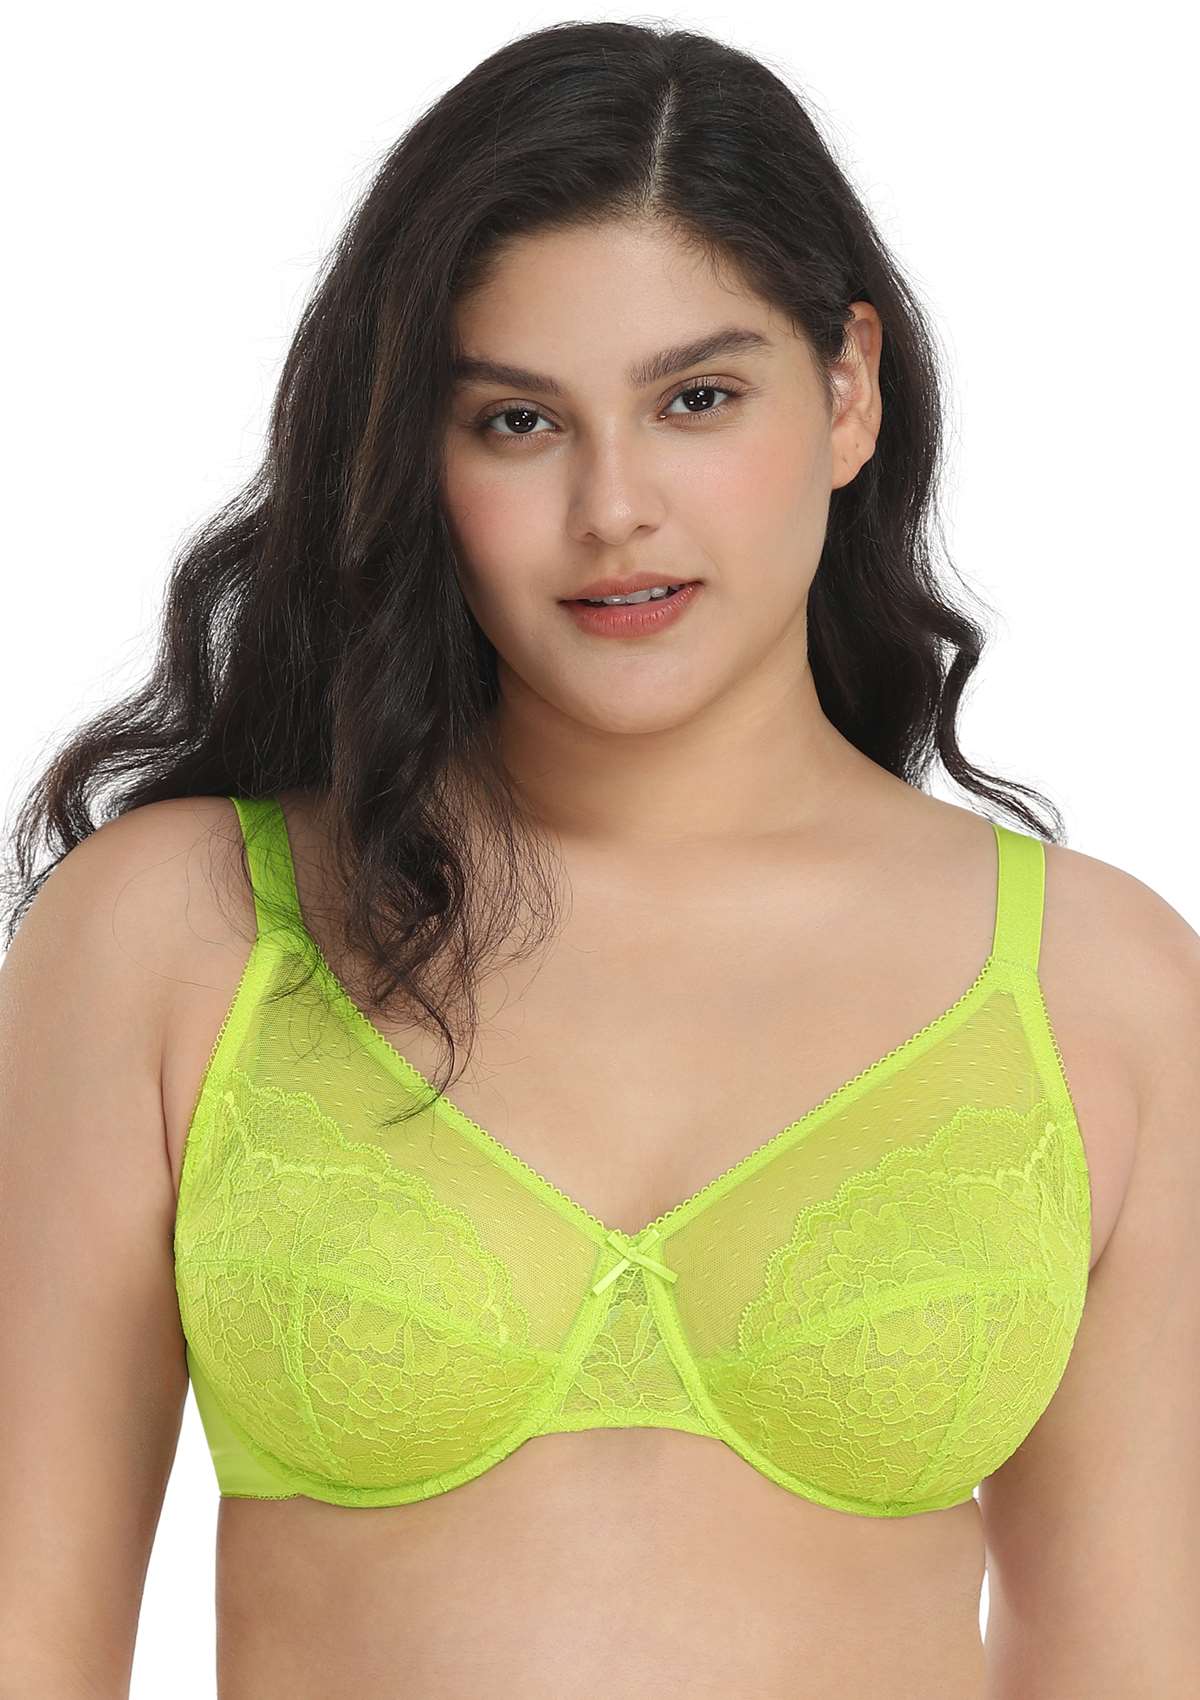 HSIA Enchante Full Cup Minimizing Bra: Supportive Unlined Lace Bra - Lime Green / 46 / DDD/F